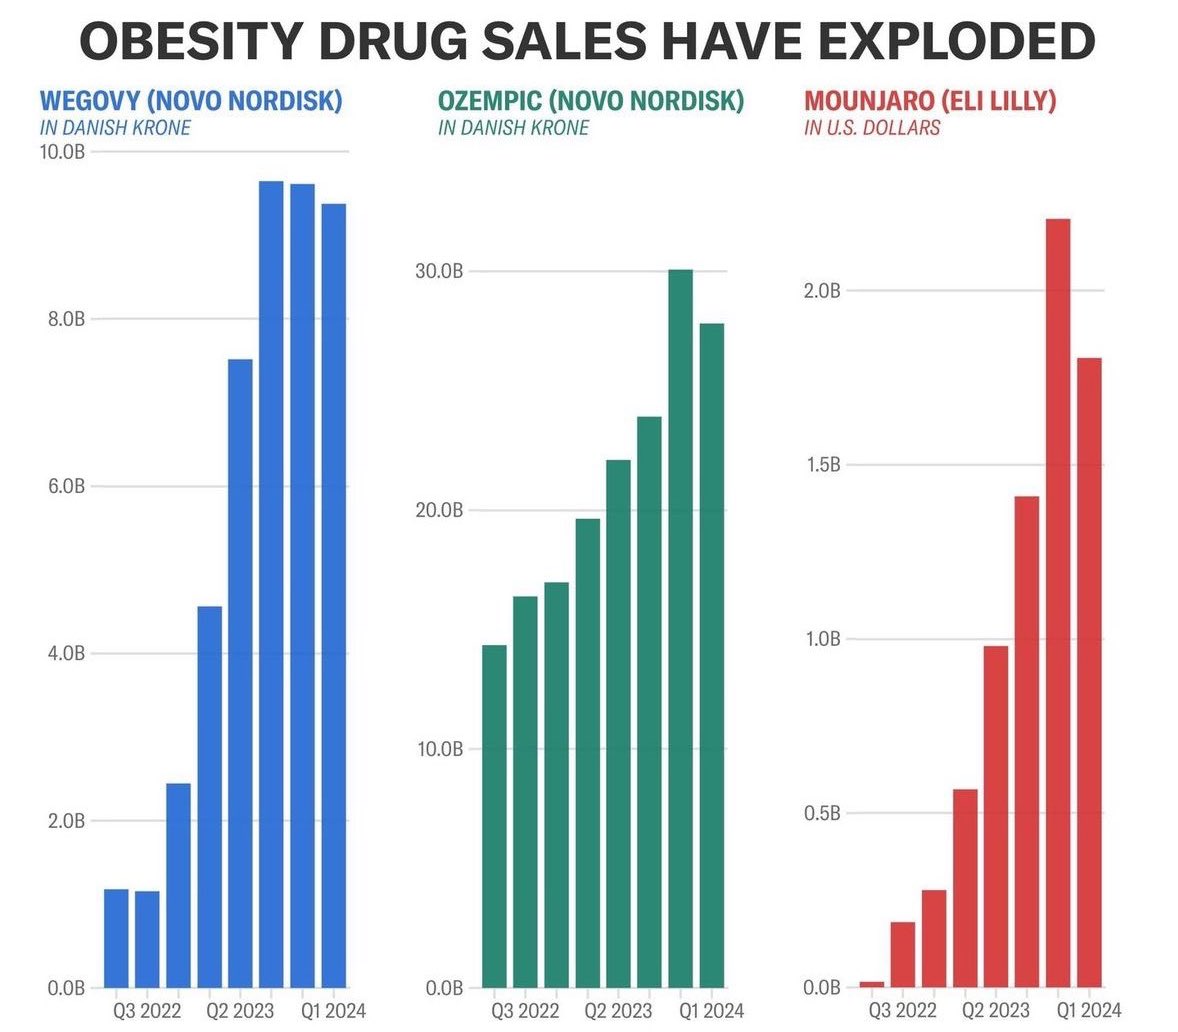 The only issue with obesity drugs is, when you stop taking them you gain more weight than what you had before you started. Other than that great success story.